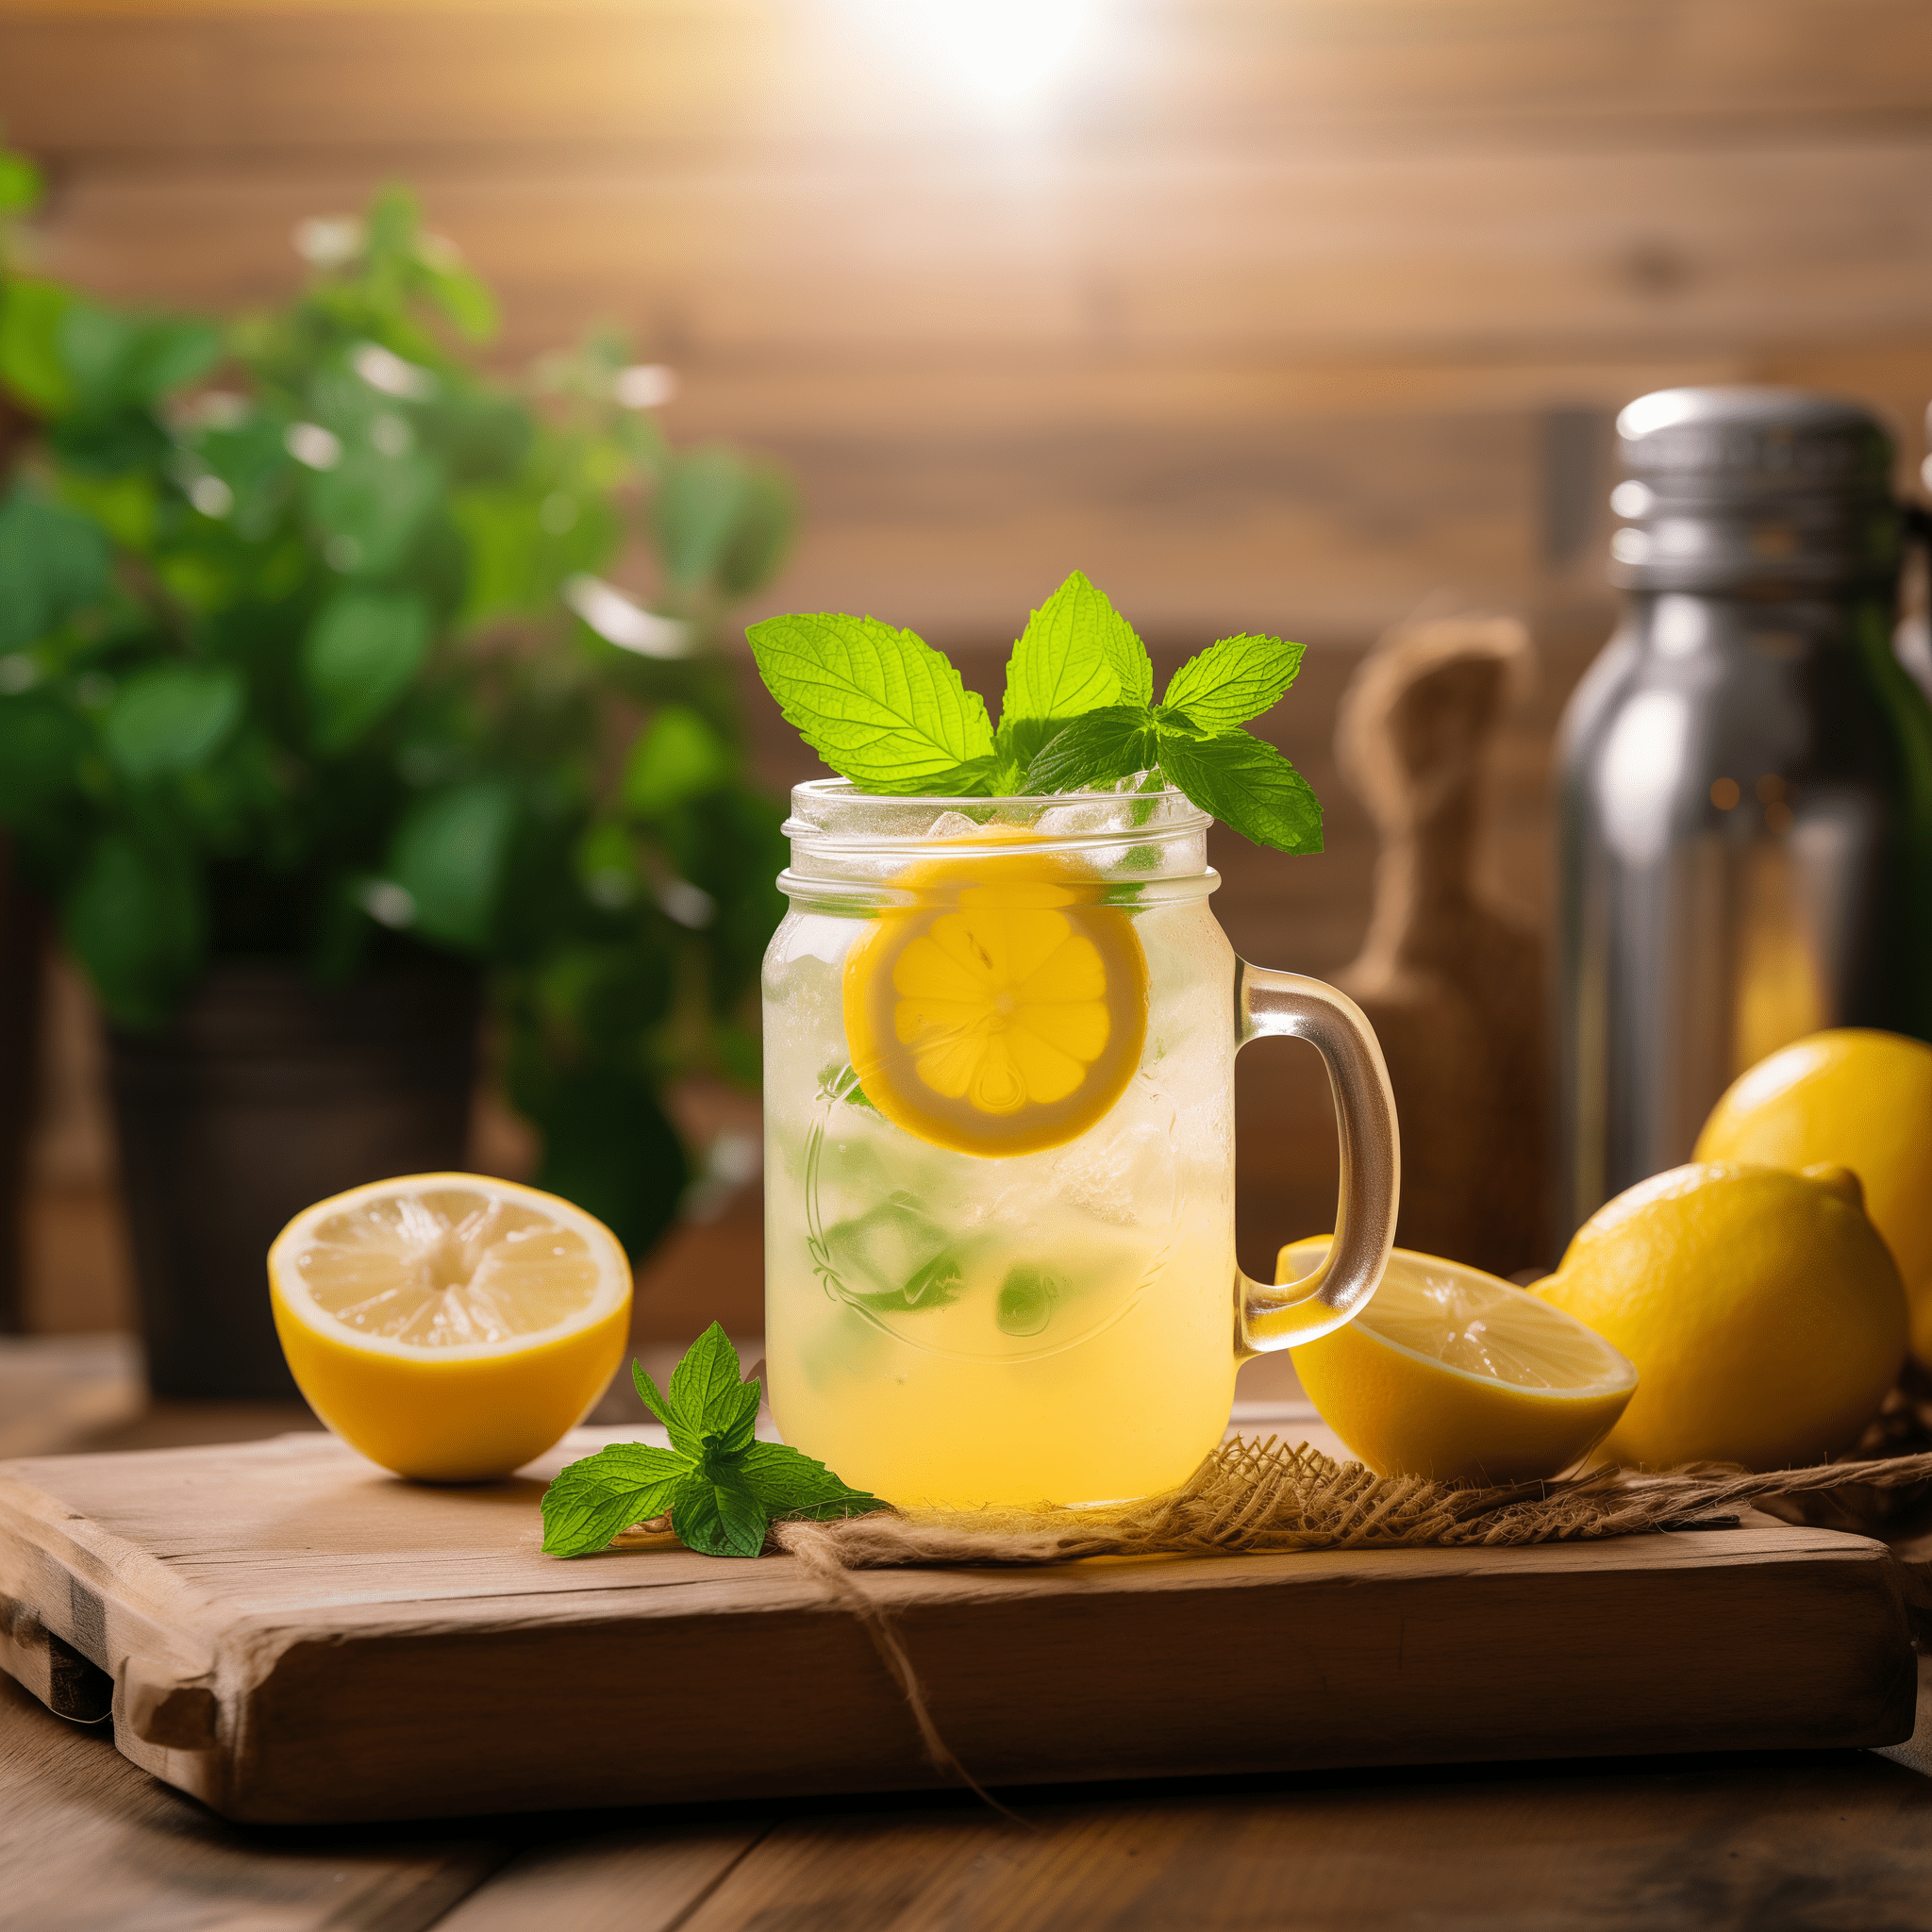 Cowboy Lemonade Cocktail Recipe - Cowboy Lemonade offers a refreshing and invigorating taste, with a perfect blend of sweetness from the lemonade and a robust, earthy undertone from the beer. The vodka provides a smooth, clean spike of alcohol that elevates the drink without overpowering the other flavors.